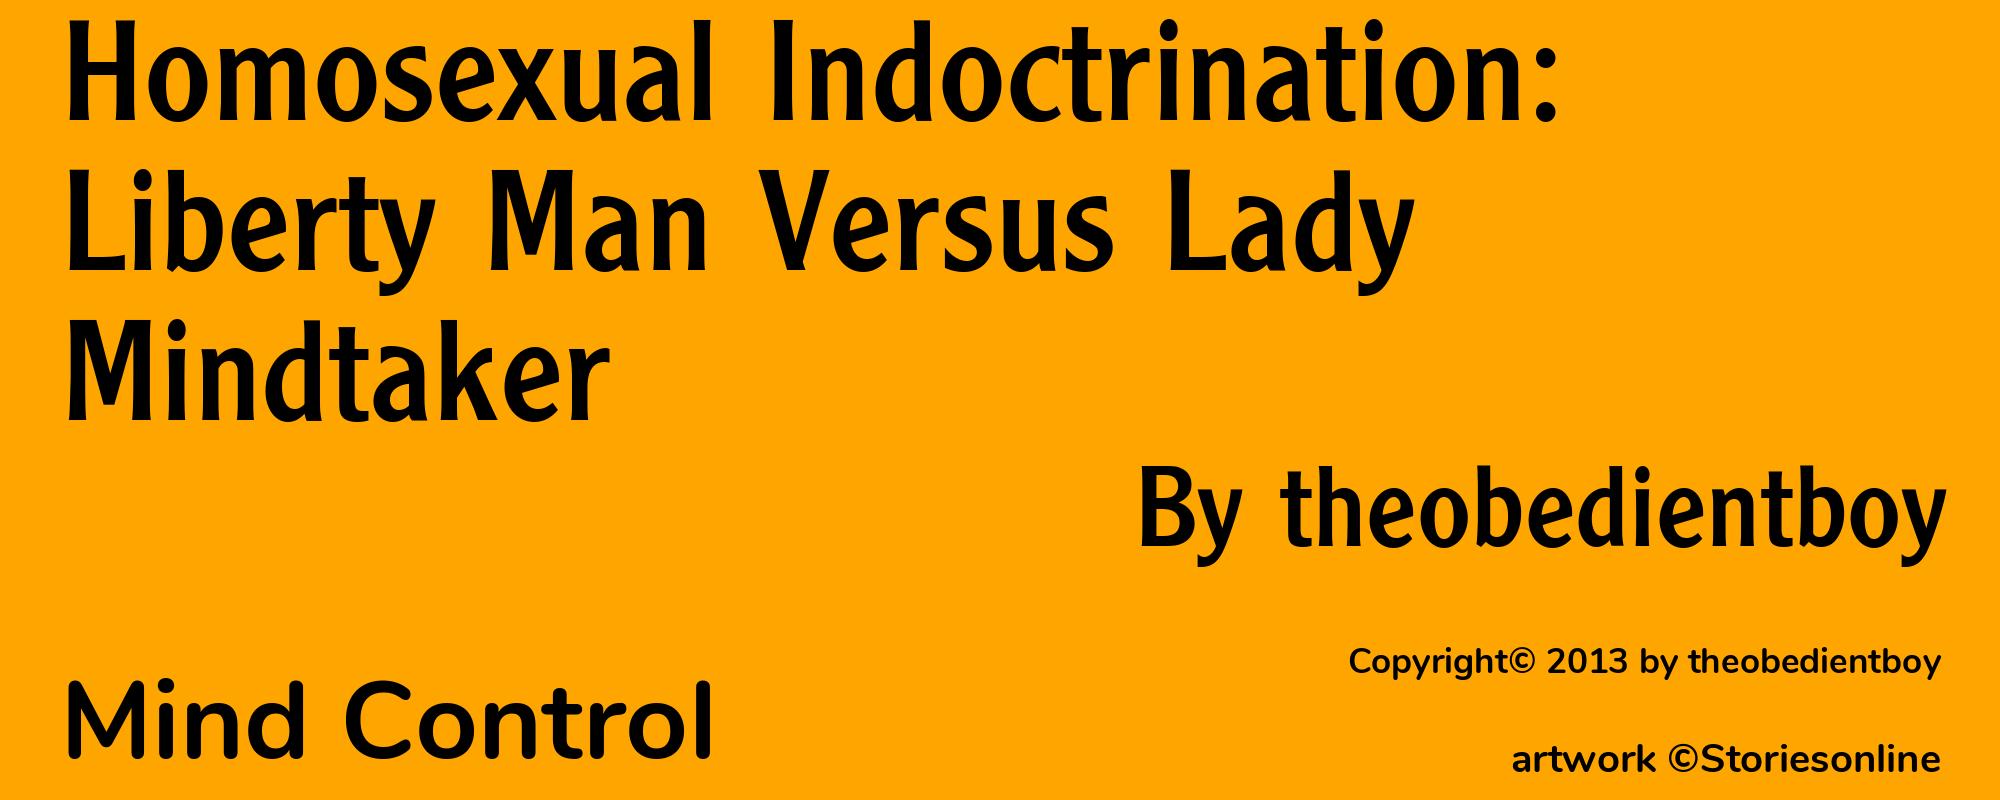 Homosexual Indoctrination: Liberty Man Versus Lady Mindtaker - Cover